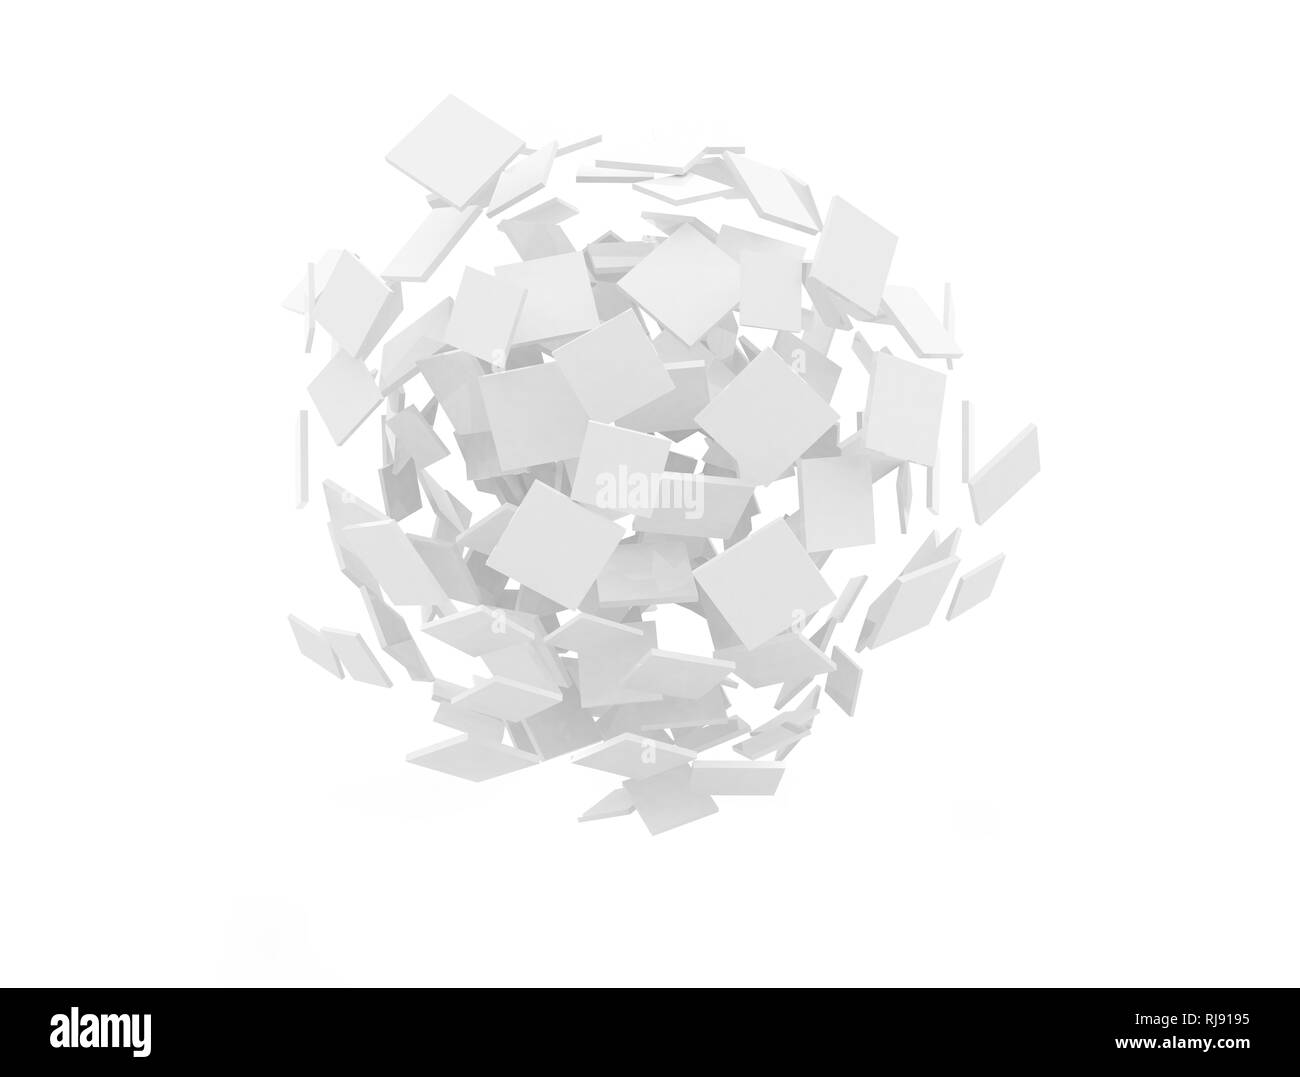 Overlapping blank white squares in a sphere shape Stock Photo